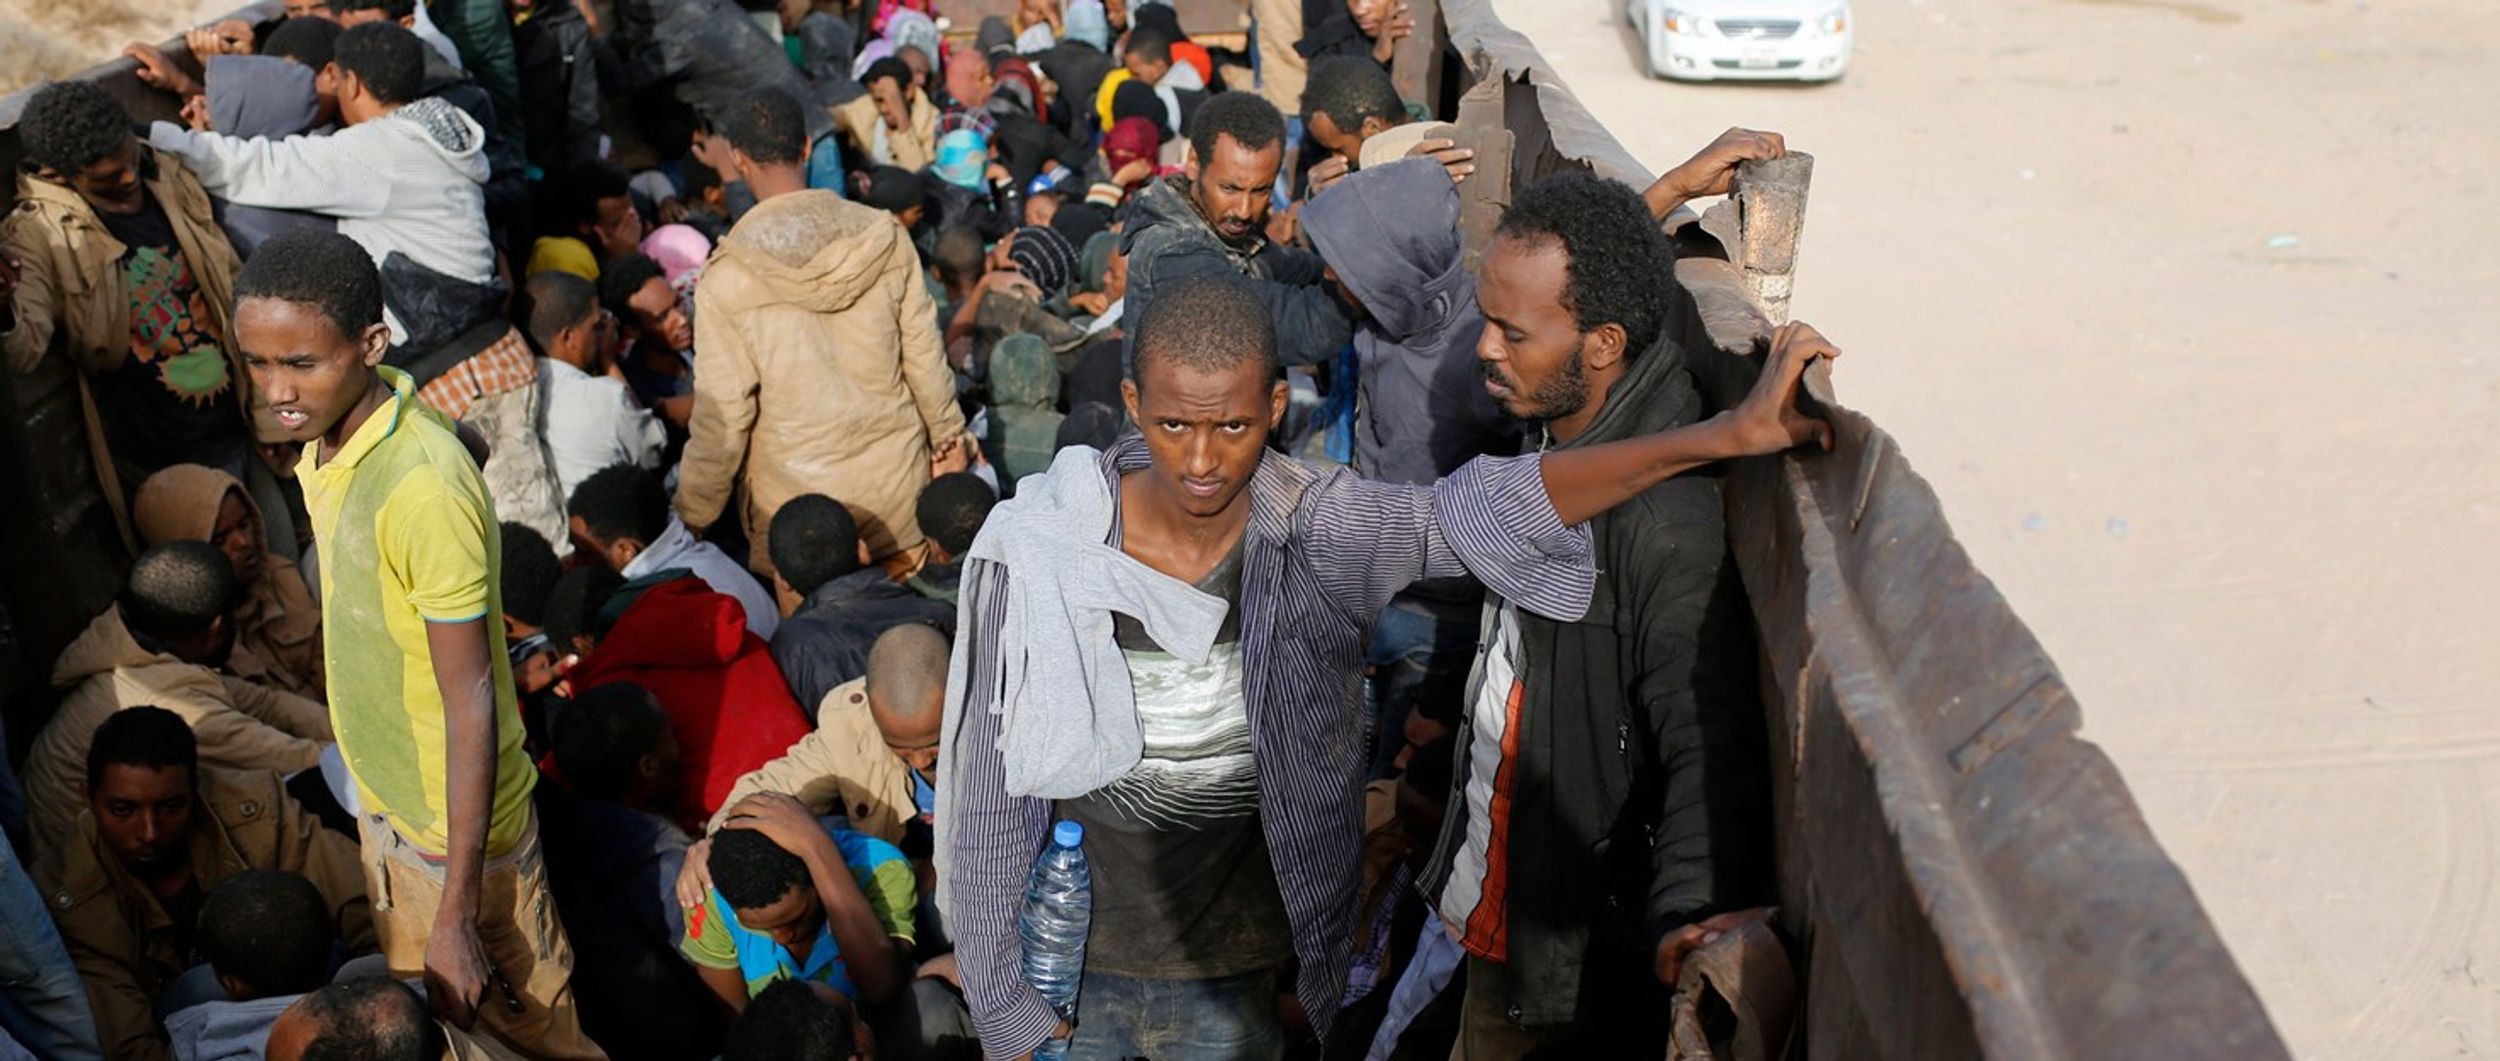 Slave Auctions of Migrants in Libya